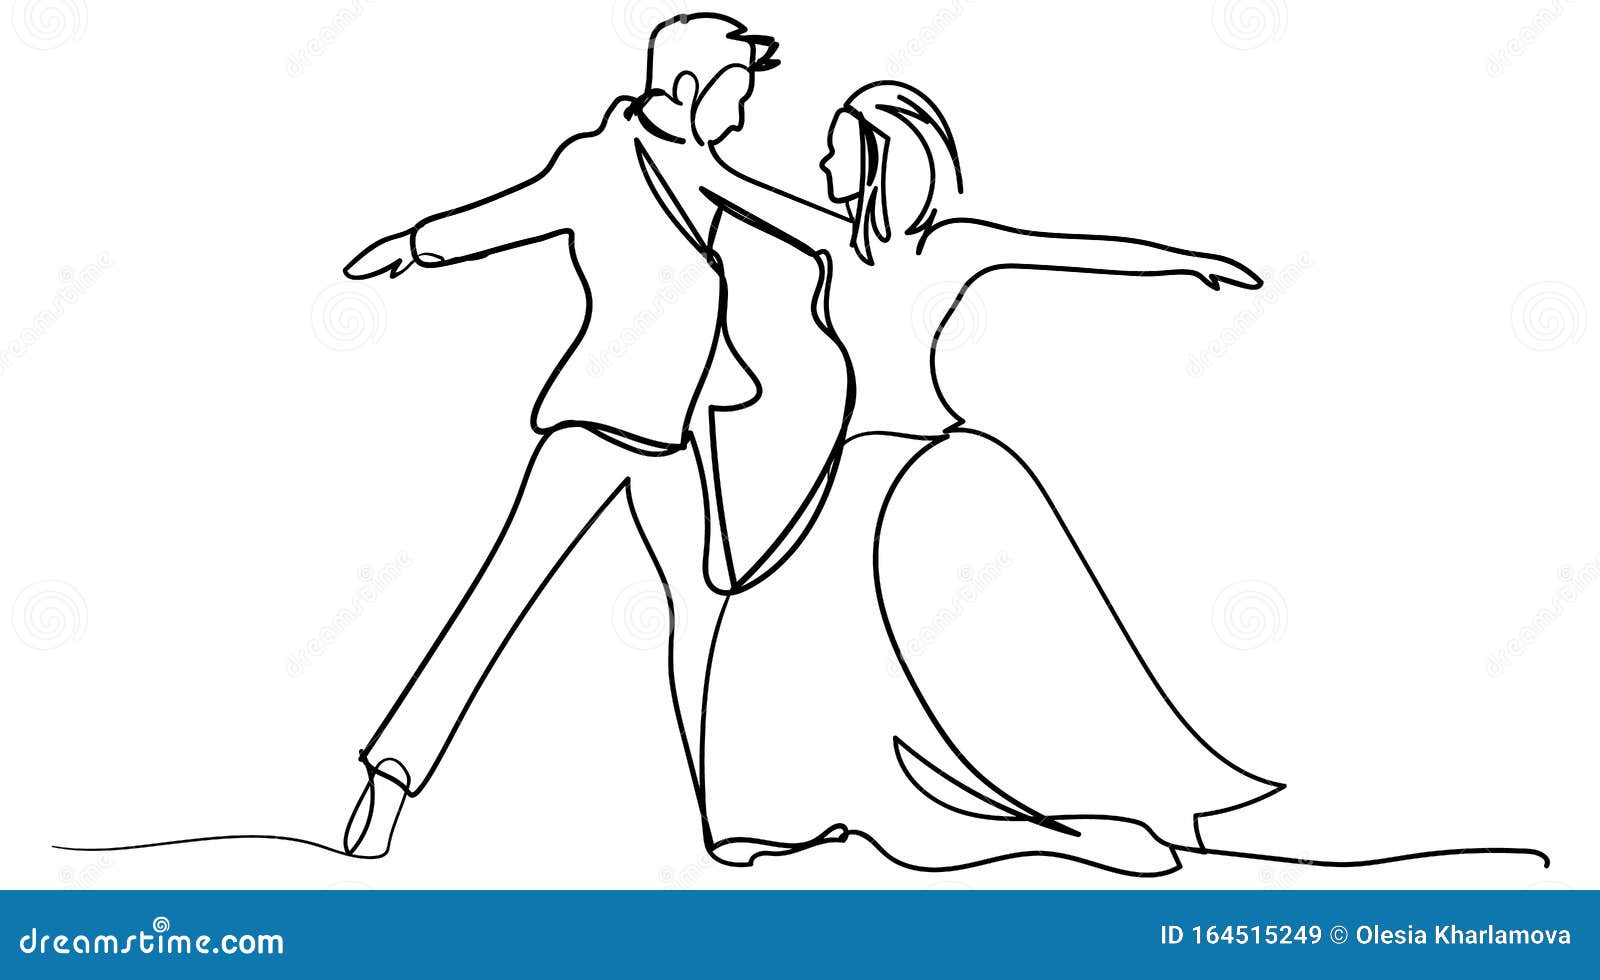 Dancing Couple. Continuous Line Drawing Stock Vector - Illustration of ...